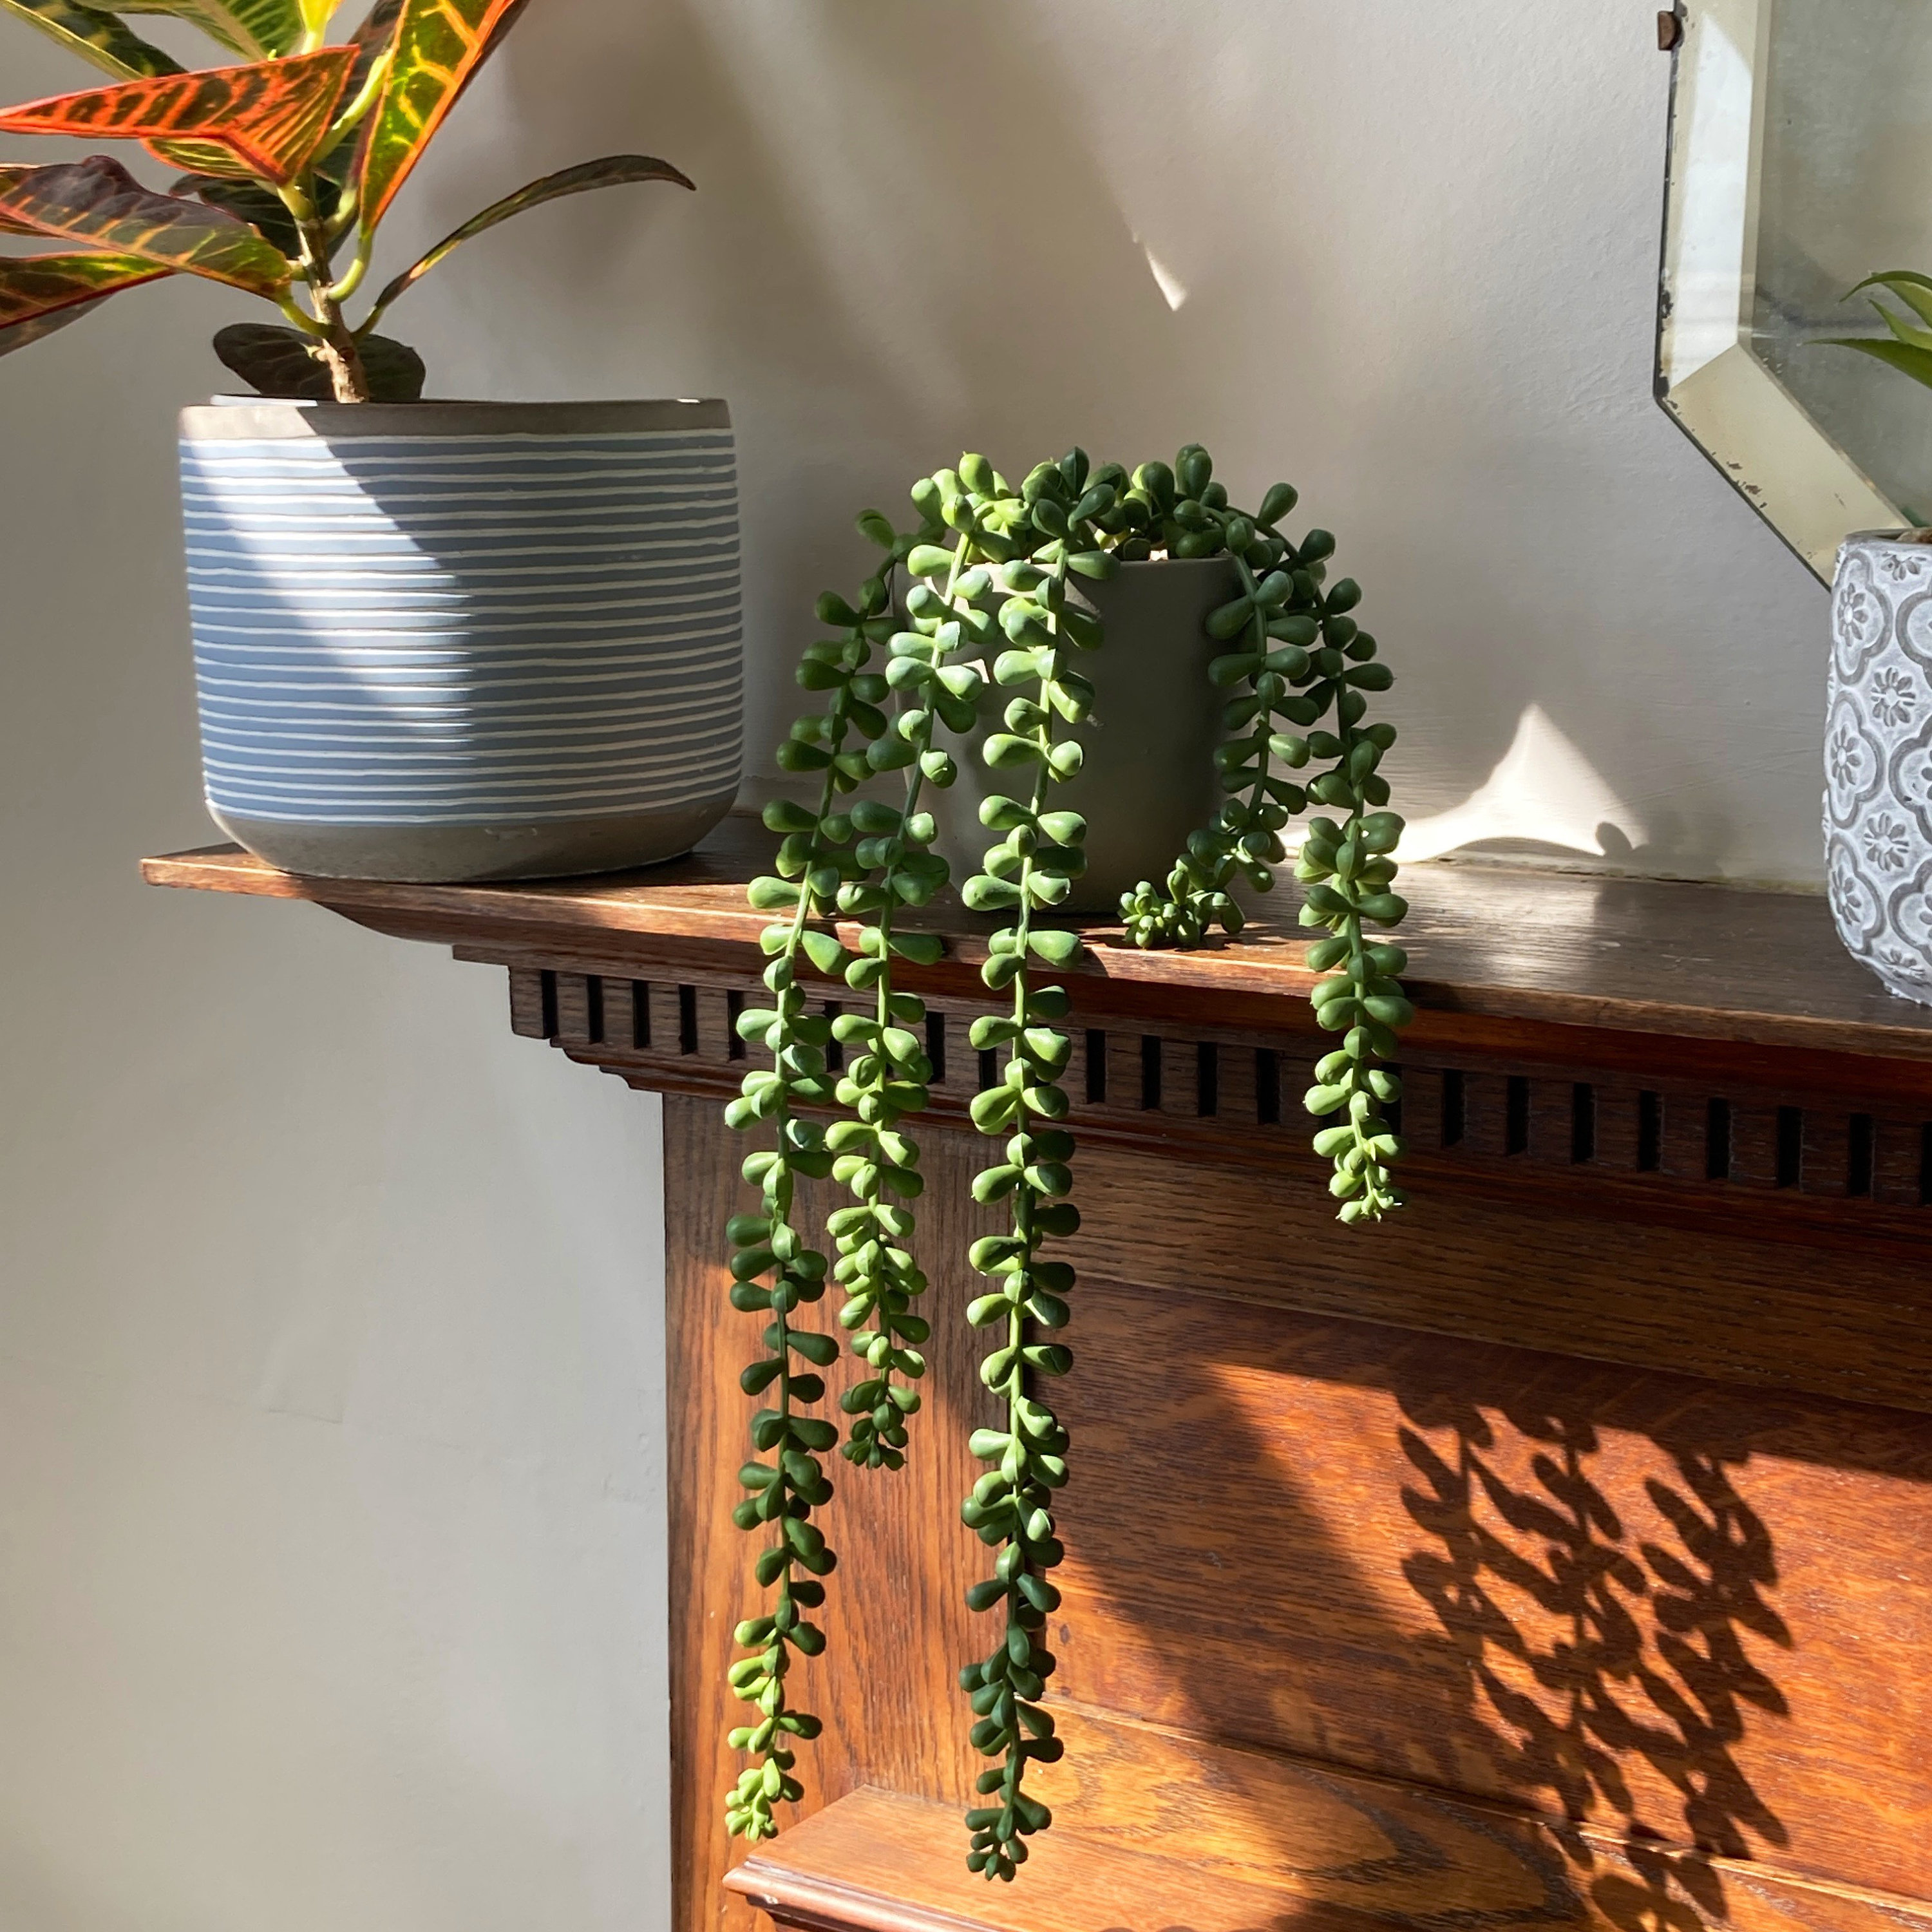 3pcs Artificial Succulents Hanging Plants,Fake String of Pearls Greenery  Plants,Decoration for Wall,Home,Garden,Indoor and Outdoor